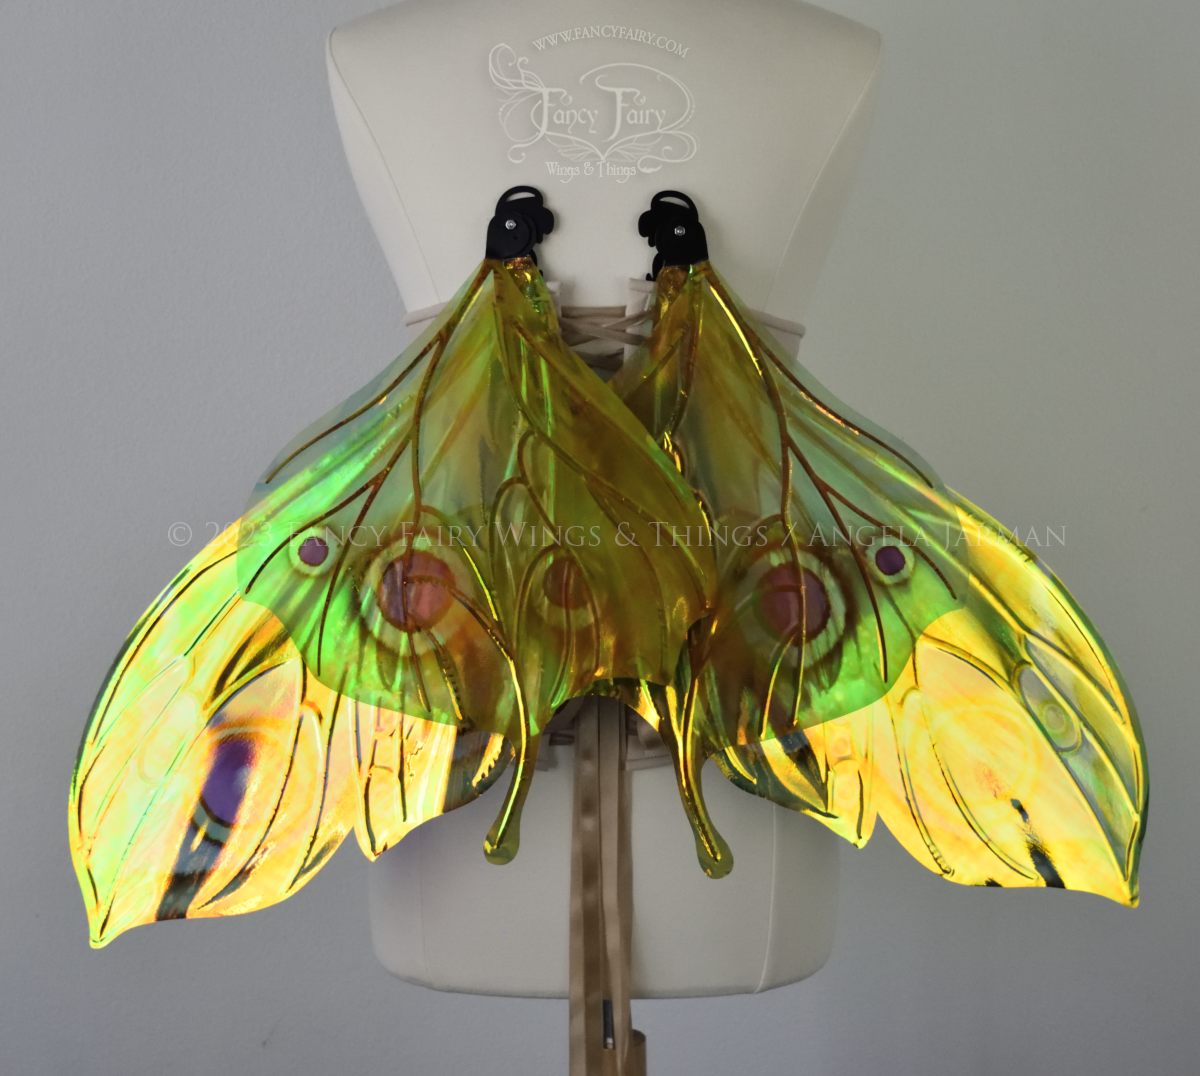 Back view of iridescent green, black and fuchsia costume fairy wings, worn on a dressform, in resting position